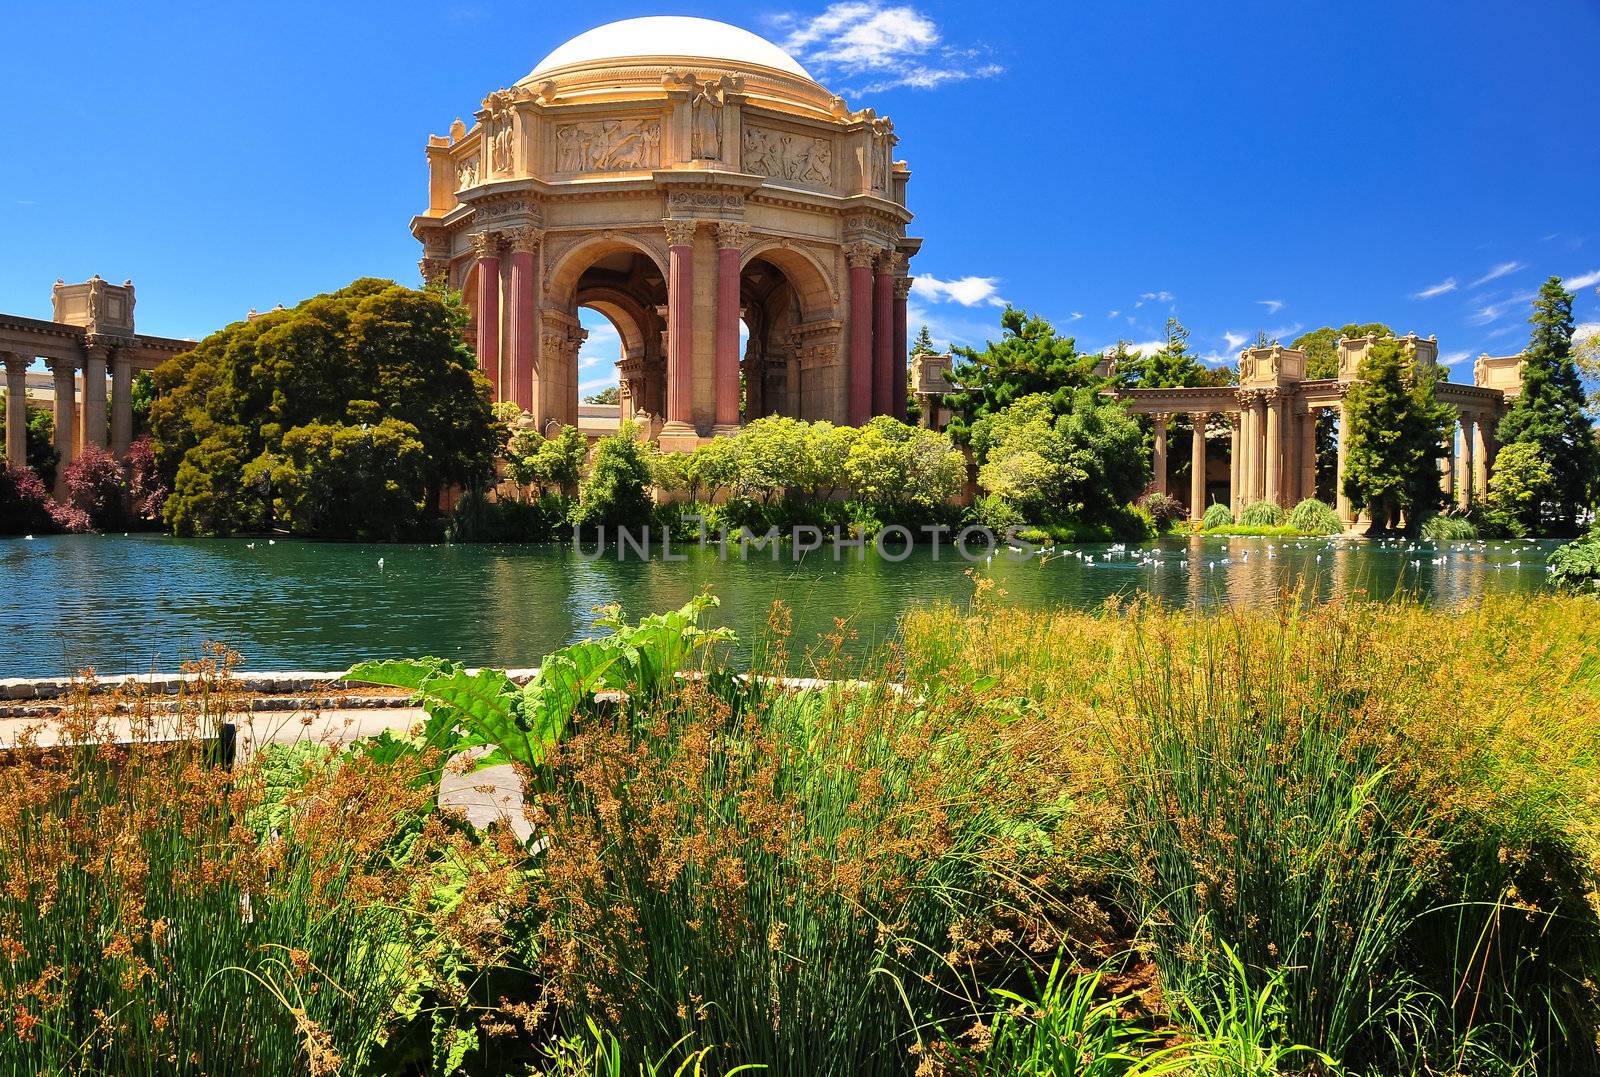 San Francisco park Palace of Fine Arts by martinm303